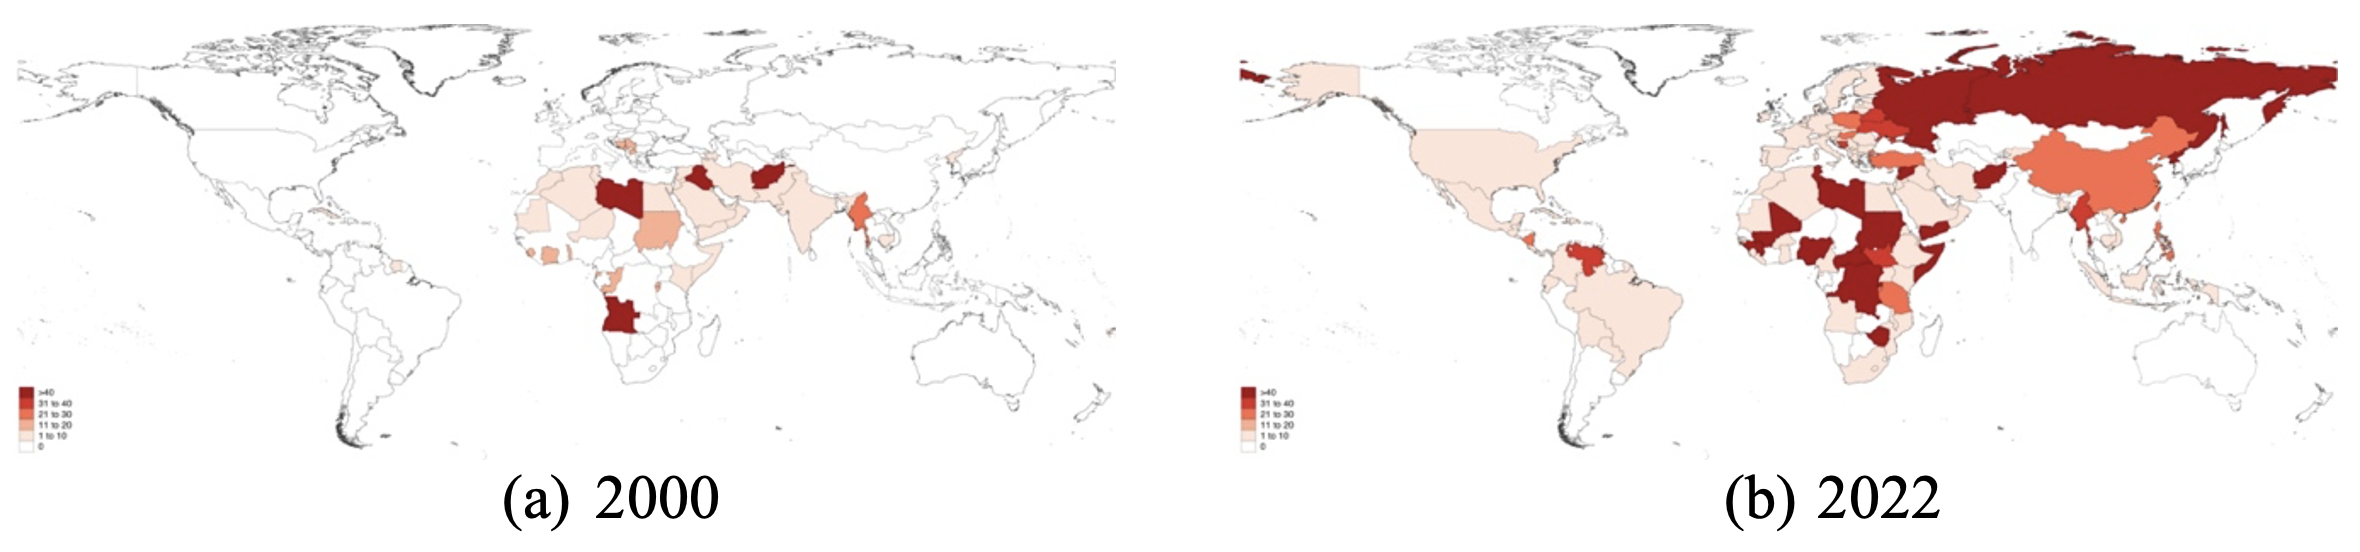 Figure 2 Growing geographical spread of international sanctions